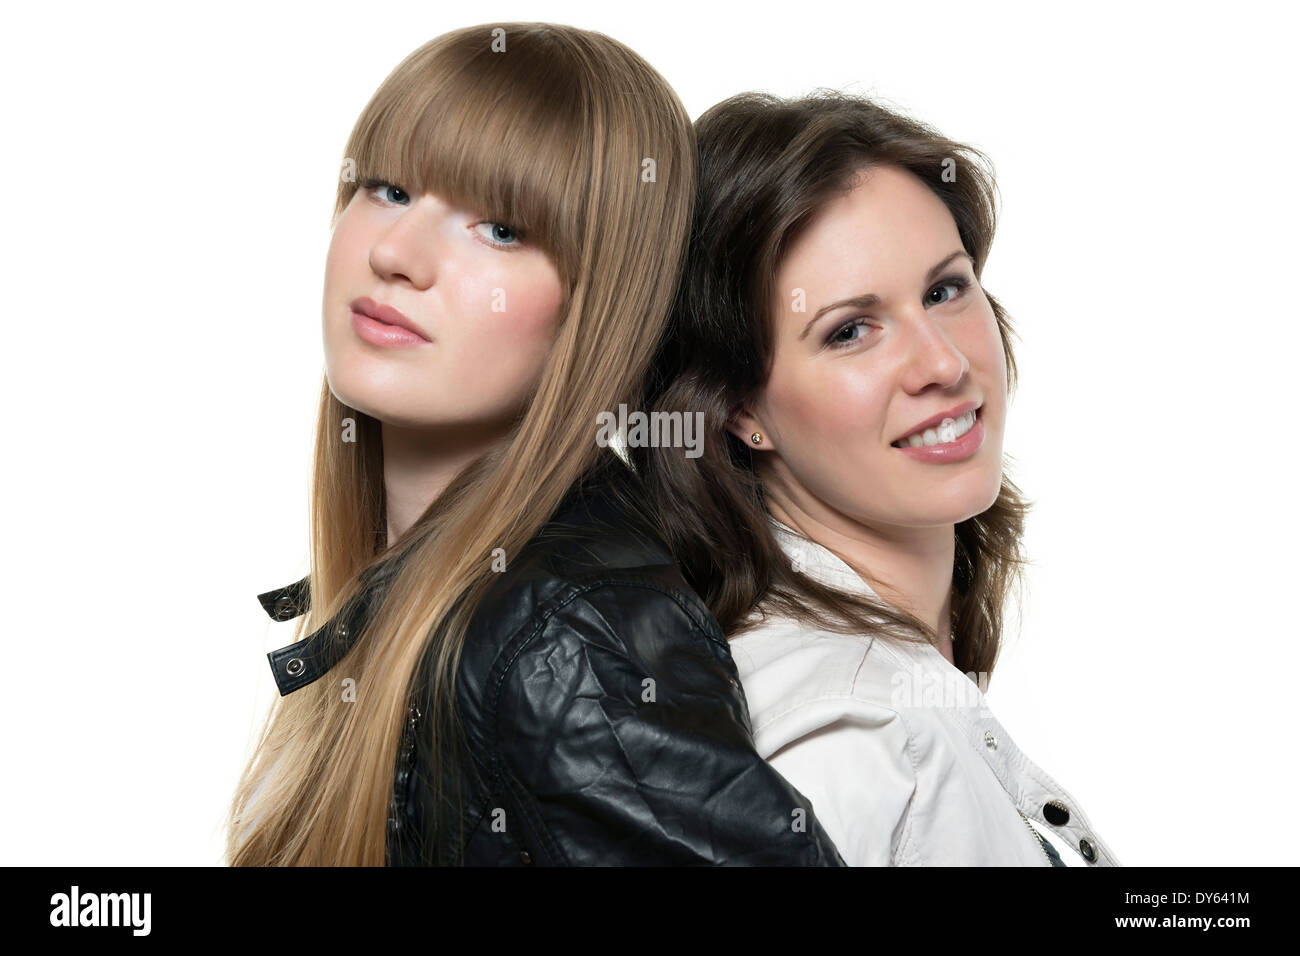 Two happy women blonde and brunette, with black and white leather jacket, standing back to back Stock Photo